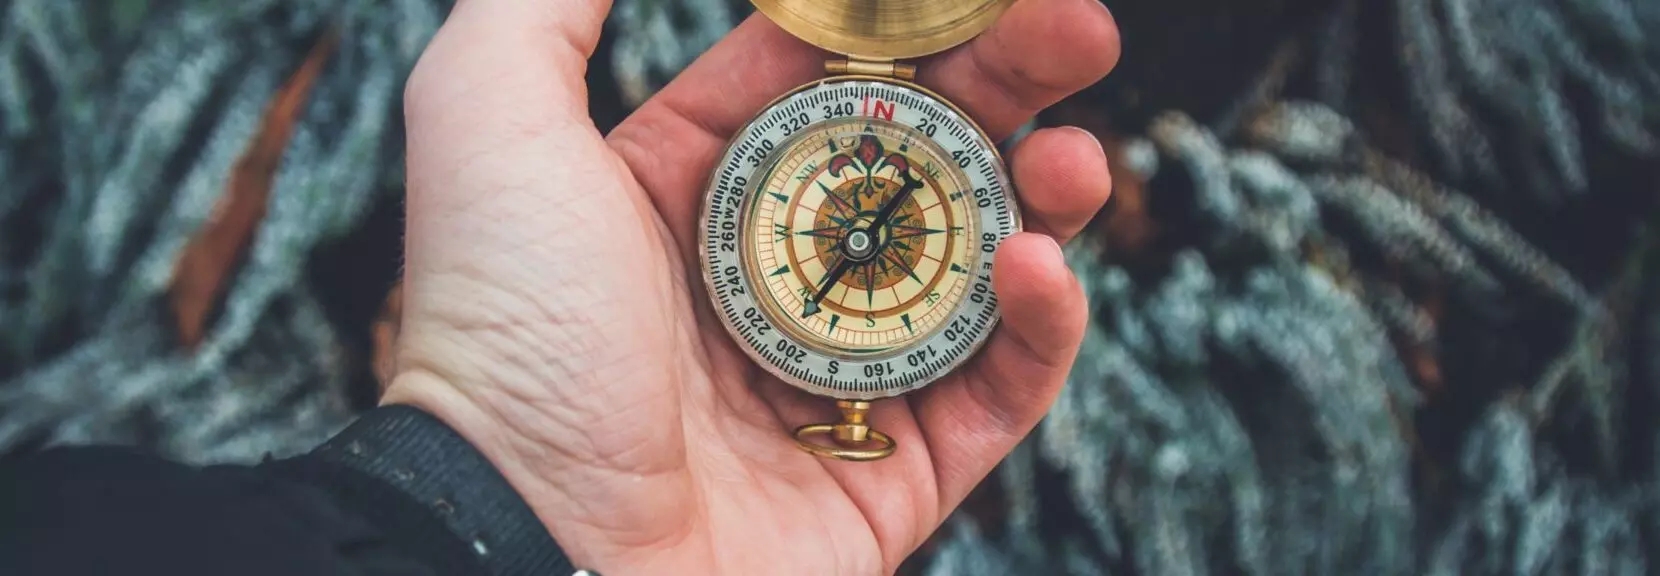 a hand holds a compass in front of some trees